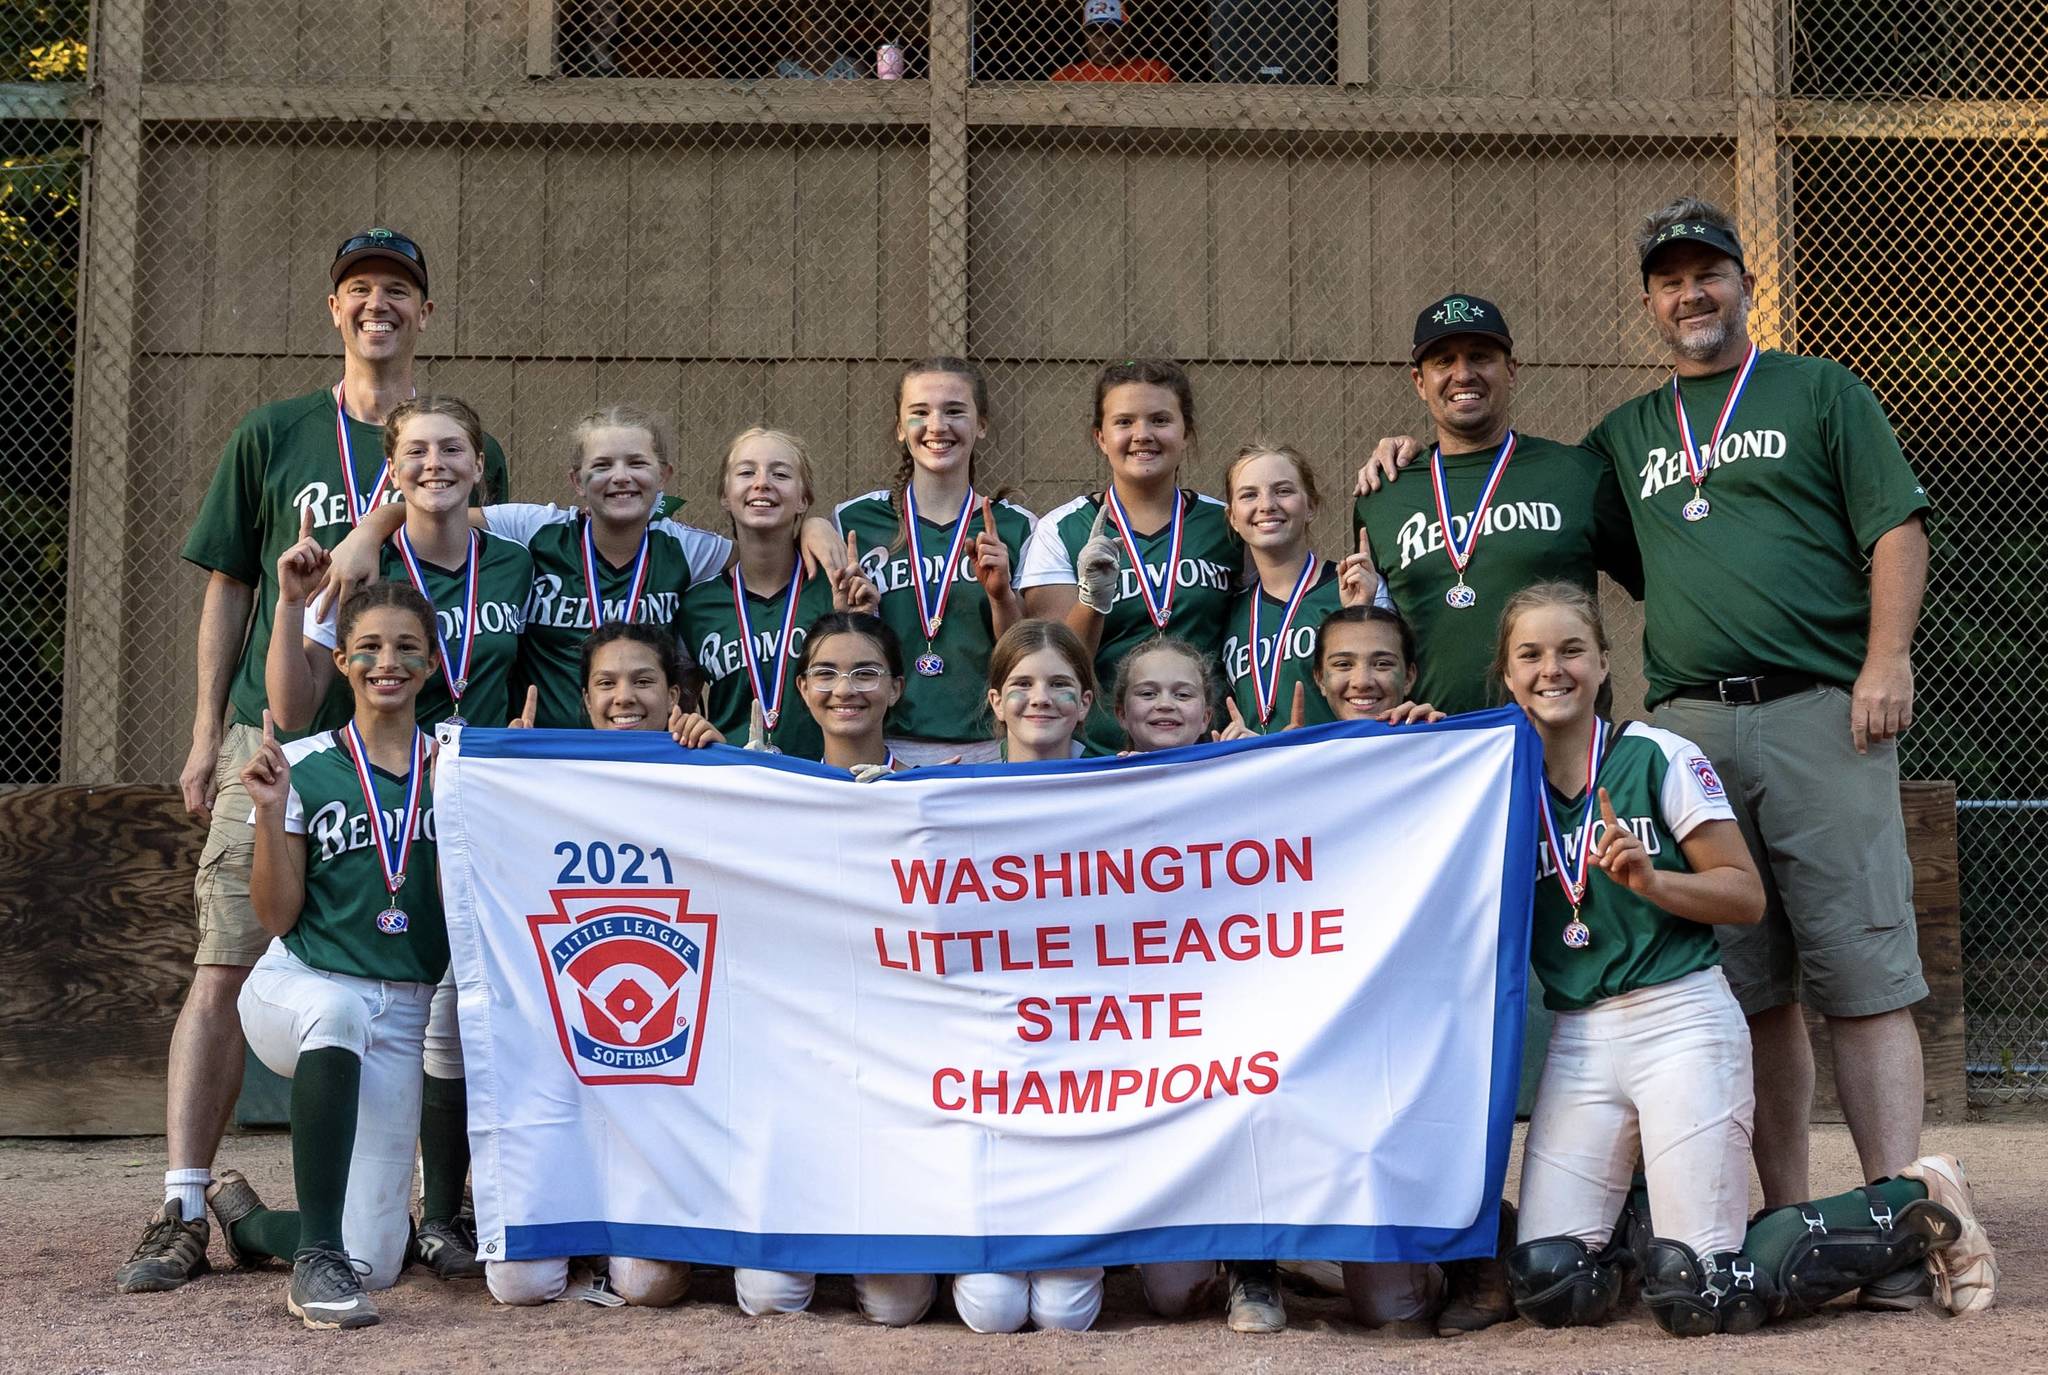 Redmond Little League’s state-championship softball majors squad. Top row (left to right): Coach Wes Barcalow, Julia Cady, Ella Carter, Livy Ruess, Ainsley Barcalow, Mia Perez, Addy Ruess, manager Casey Ruess and coach Robert Hartman. Bottom row (left to right): Daisy Walker, Simone Loving-Williams, Ella Enich, Abby Hartman, Zoey Cooper, Maggie Enich and Kati Cygan. Photo courtesy of Swen Richter